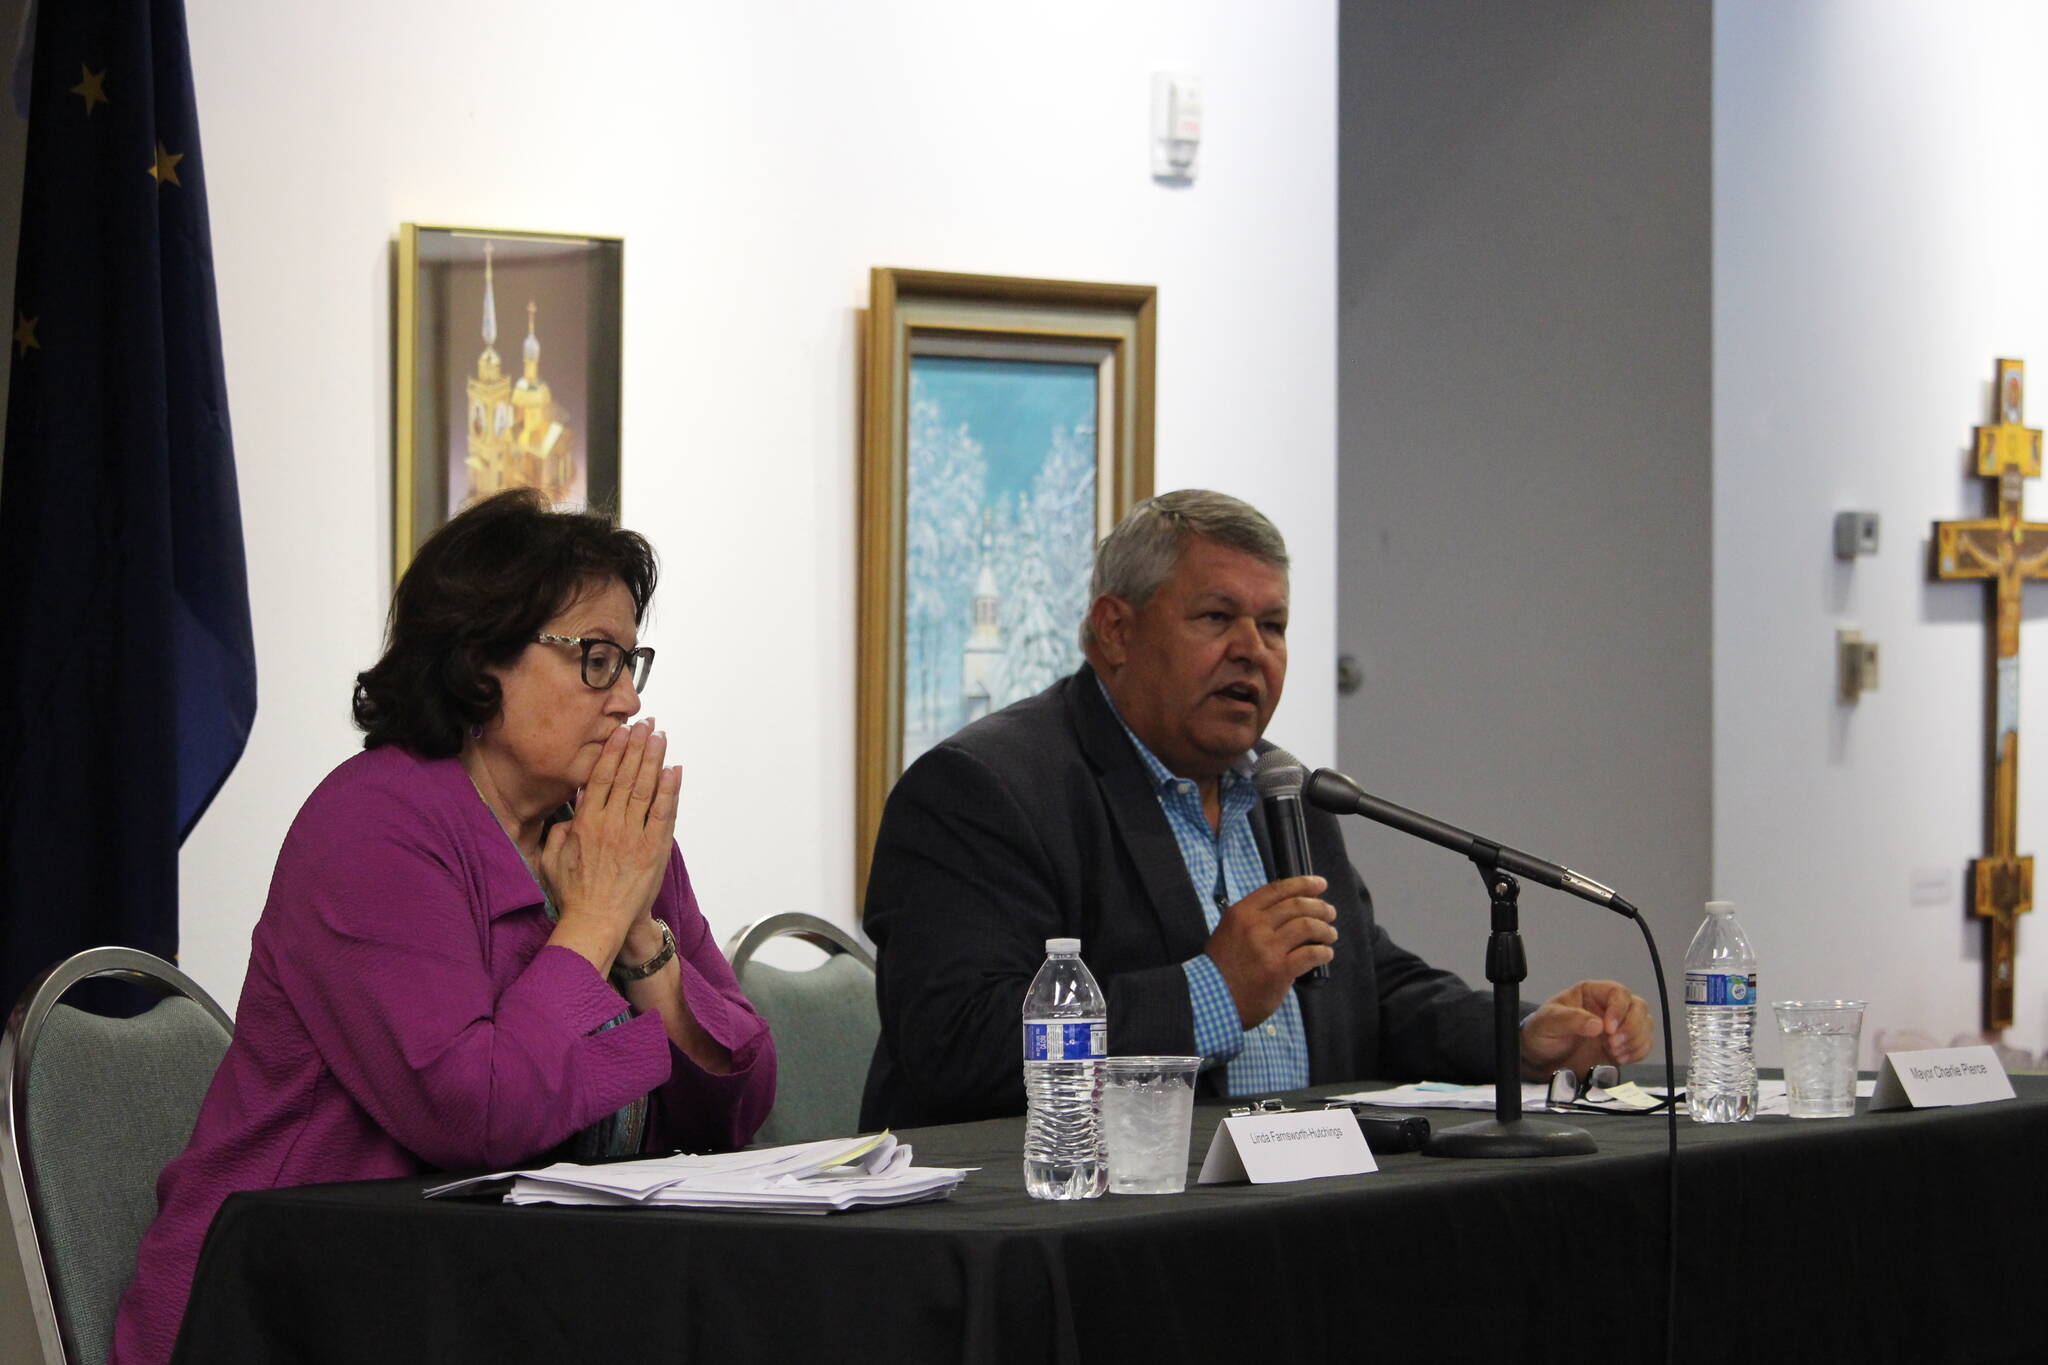 Linda Farnsworth-Hutchings, left, and Kenai Peninsula Borough Mayor Charlie Pierce, right, participate in a mayoral candidate forum hosted by the Kenai Chamber of Commerce at the Kenai Visitor and Cultural Center on Sept. 9, 2020. (Photo by Brian Mazurek/Peninsula Clarion file)